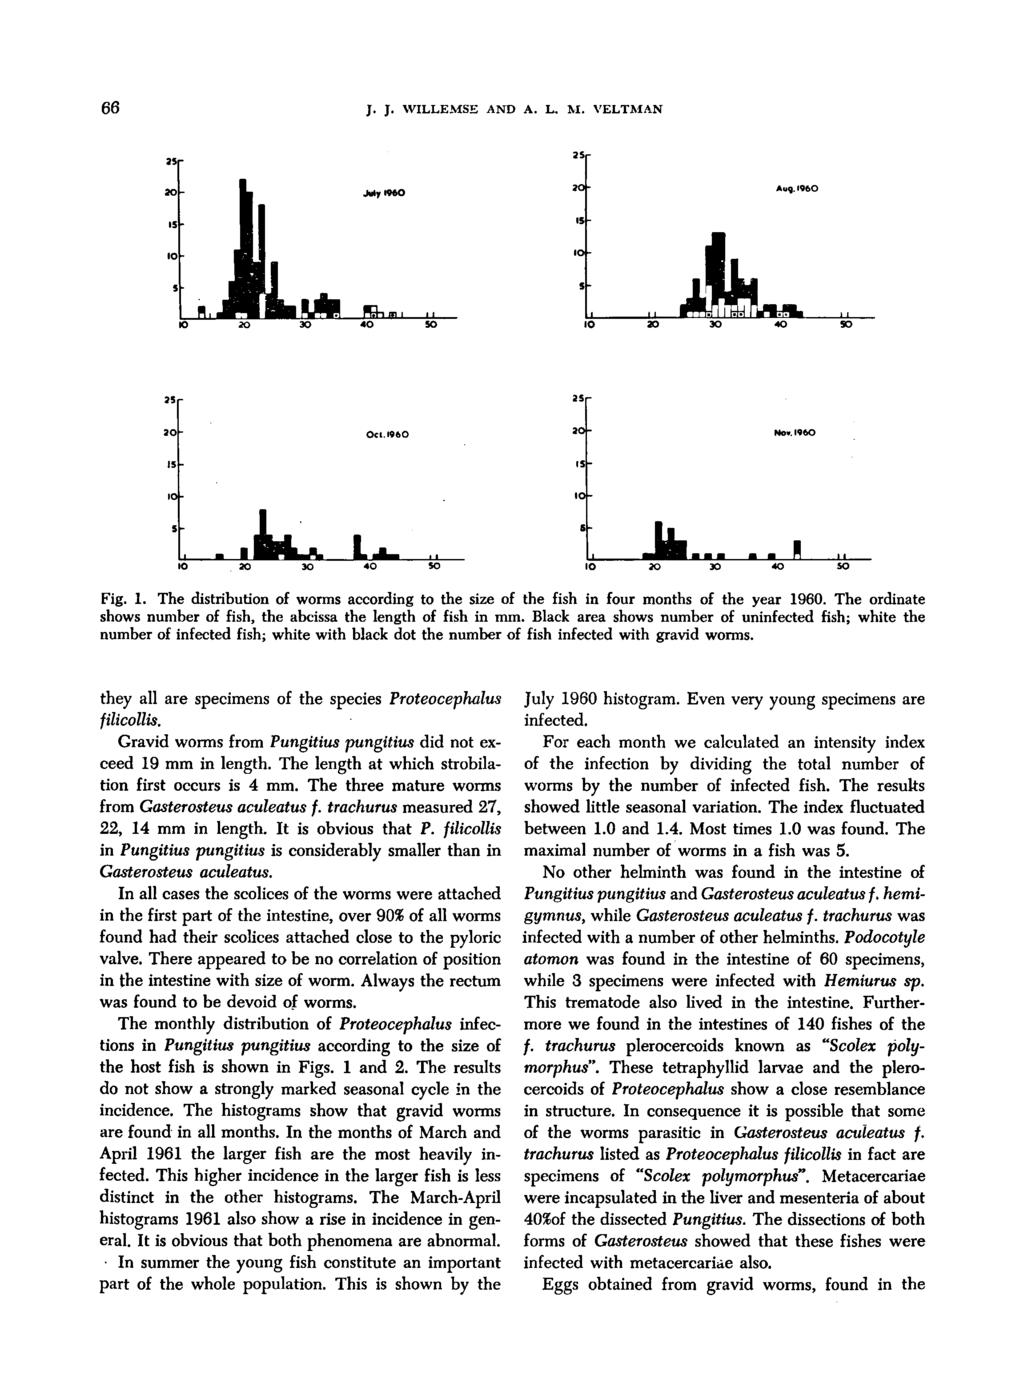 66 J. J. WILLEMSE AND A. L. M. VELTMAN Fig. 1. The distribution of worms according to the size of the fish in four months of the year 1960.